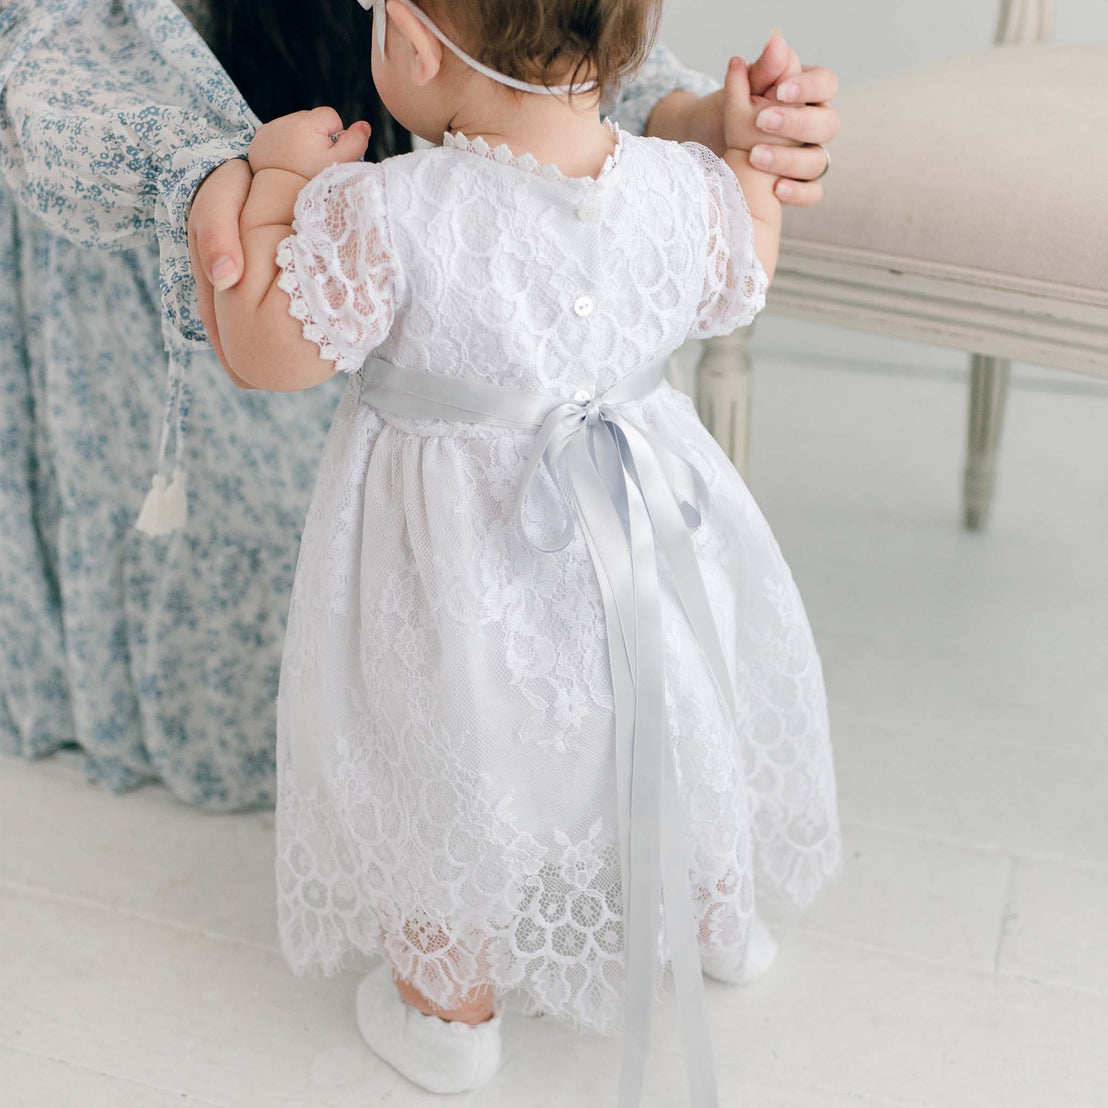 A toddler in an Olivia Dress is held by her mother, both facing away from the camera in a softly lit boutique room.